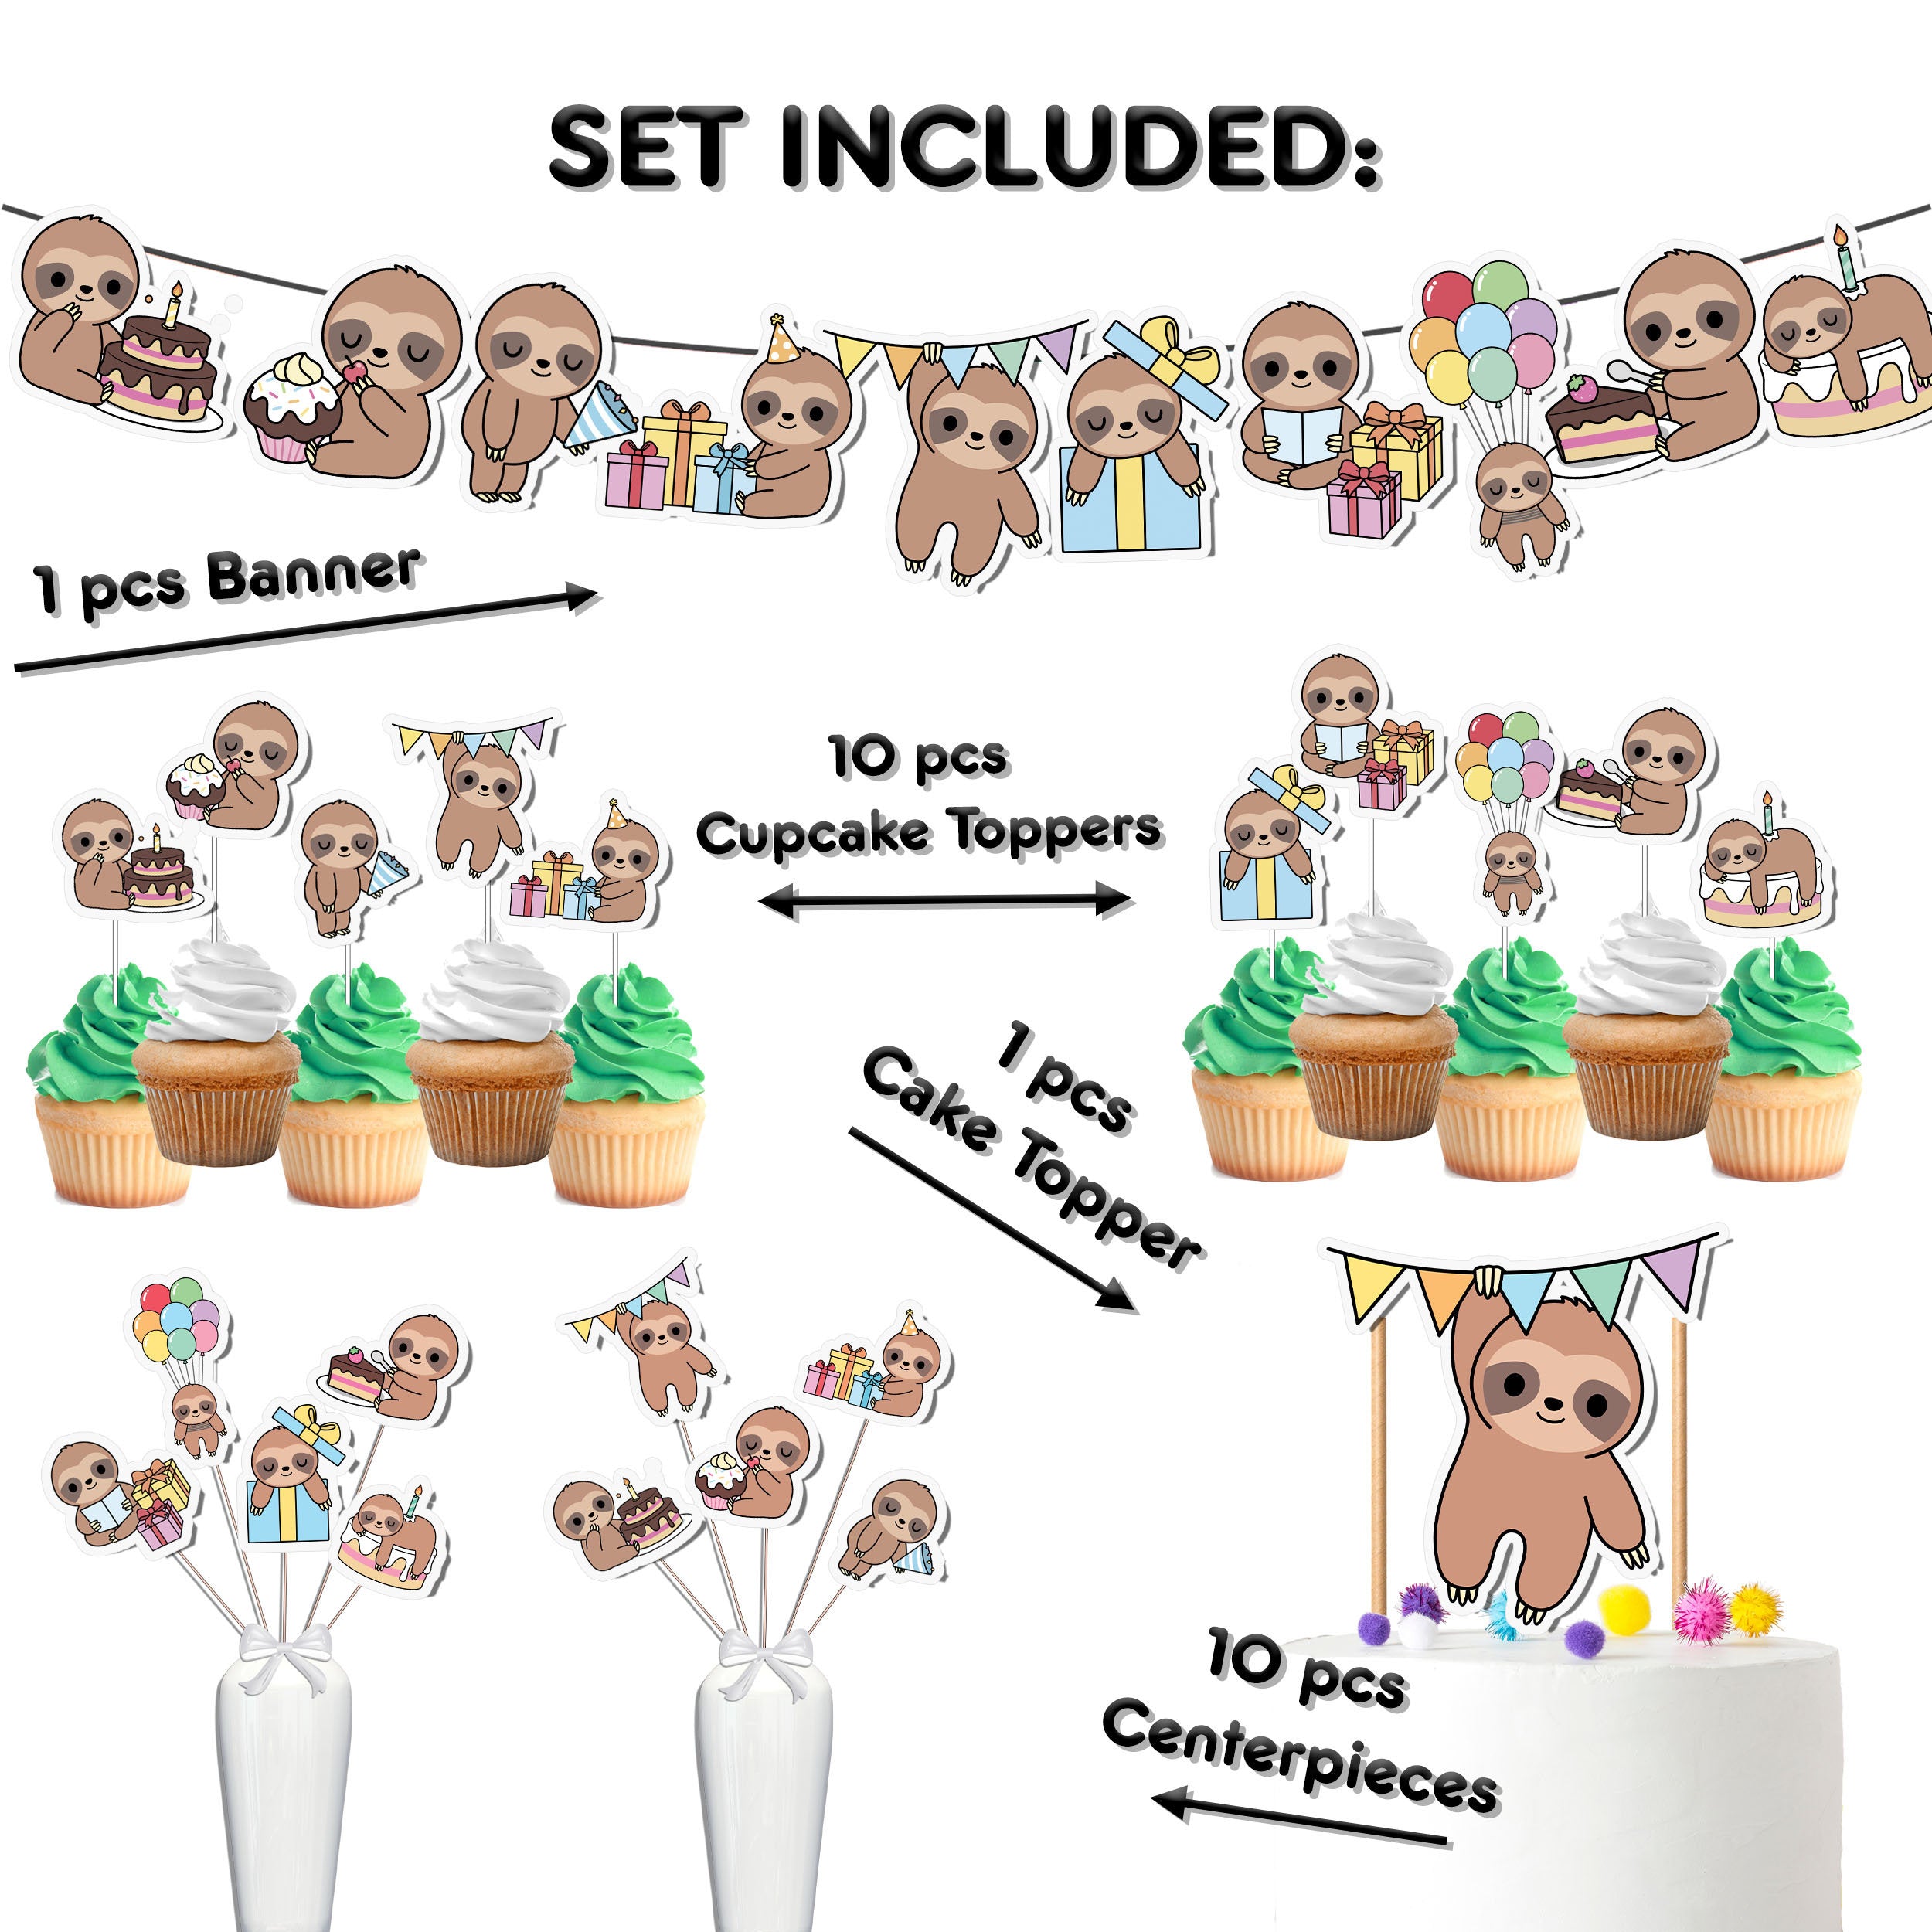 Sloth-Themed Baby Shower & Birthday Party Decoration Kit - Cute Banner, Cake & Cupcake Toppers, Centerpieces